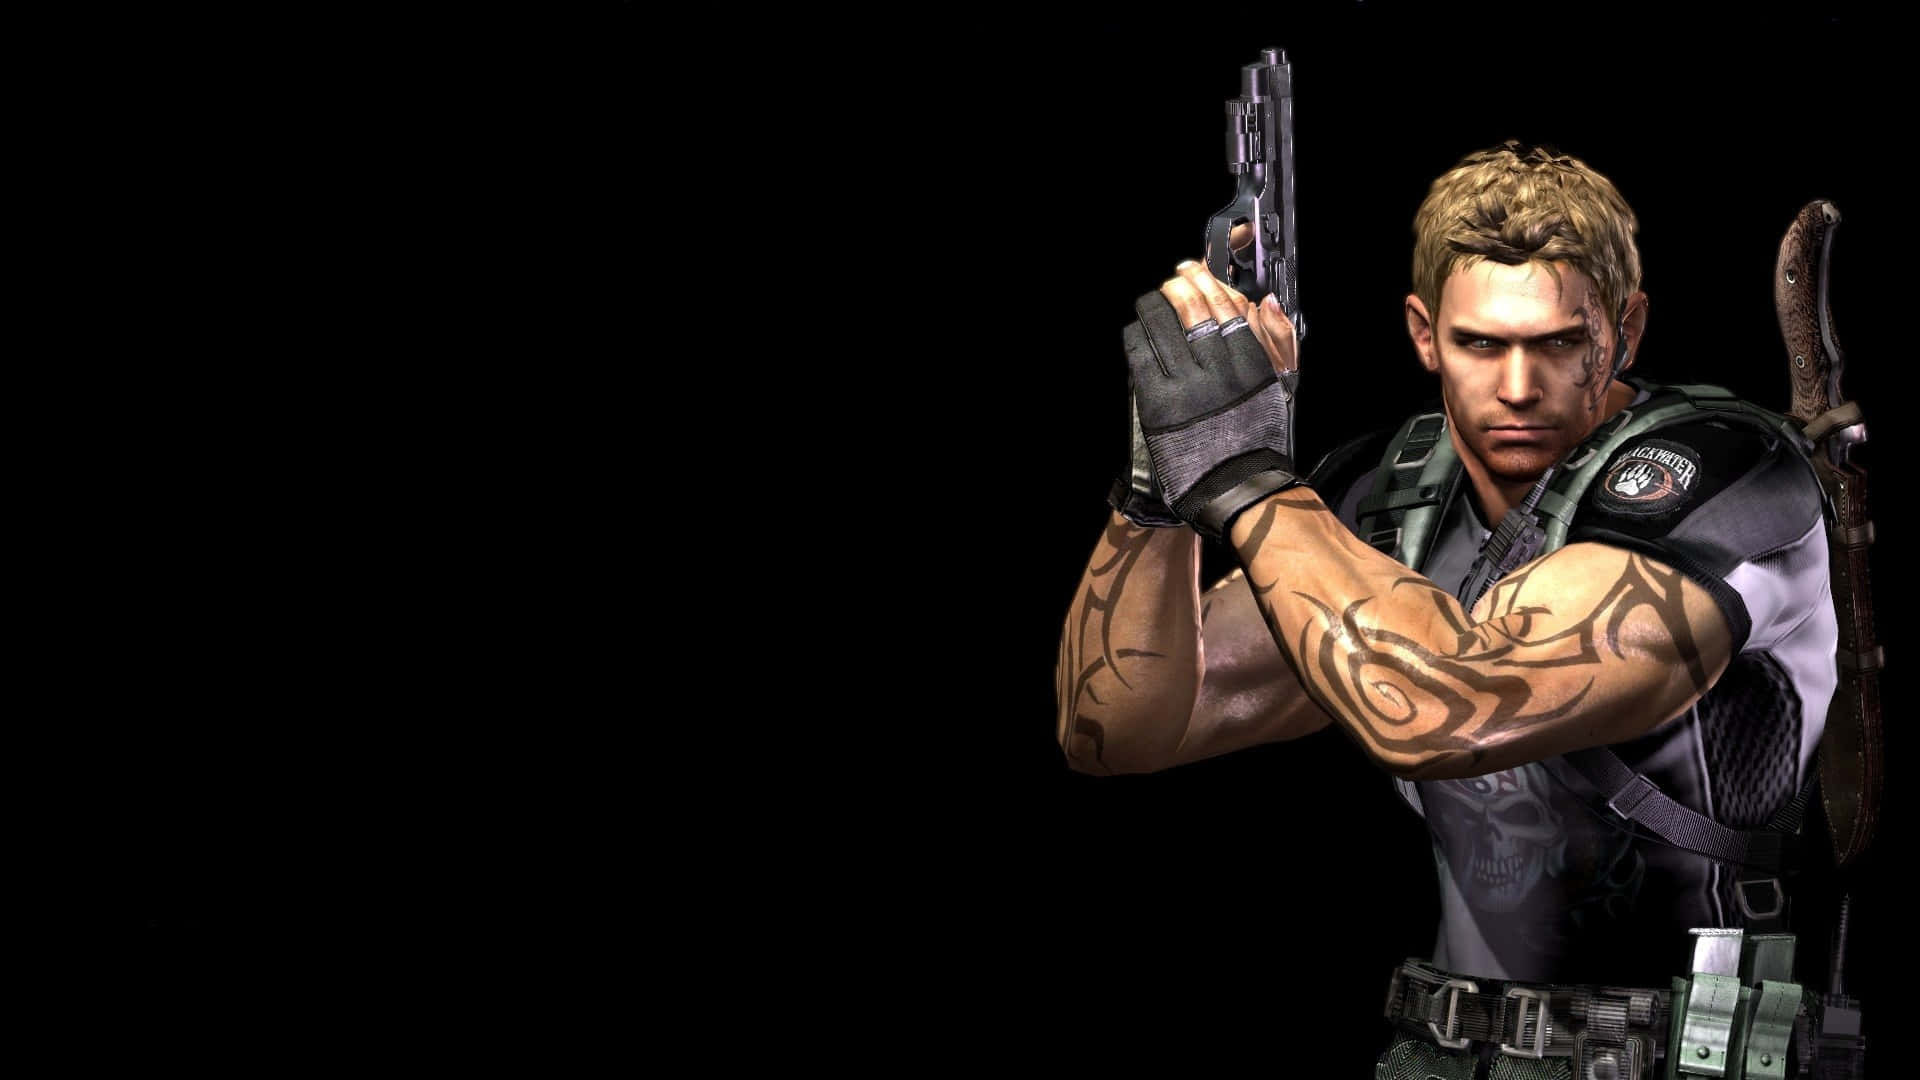 Brave And Fearless, Chris Redfield In Action Wallpaper